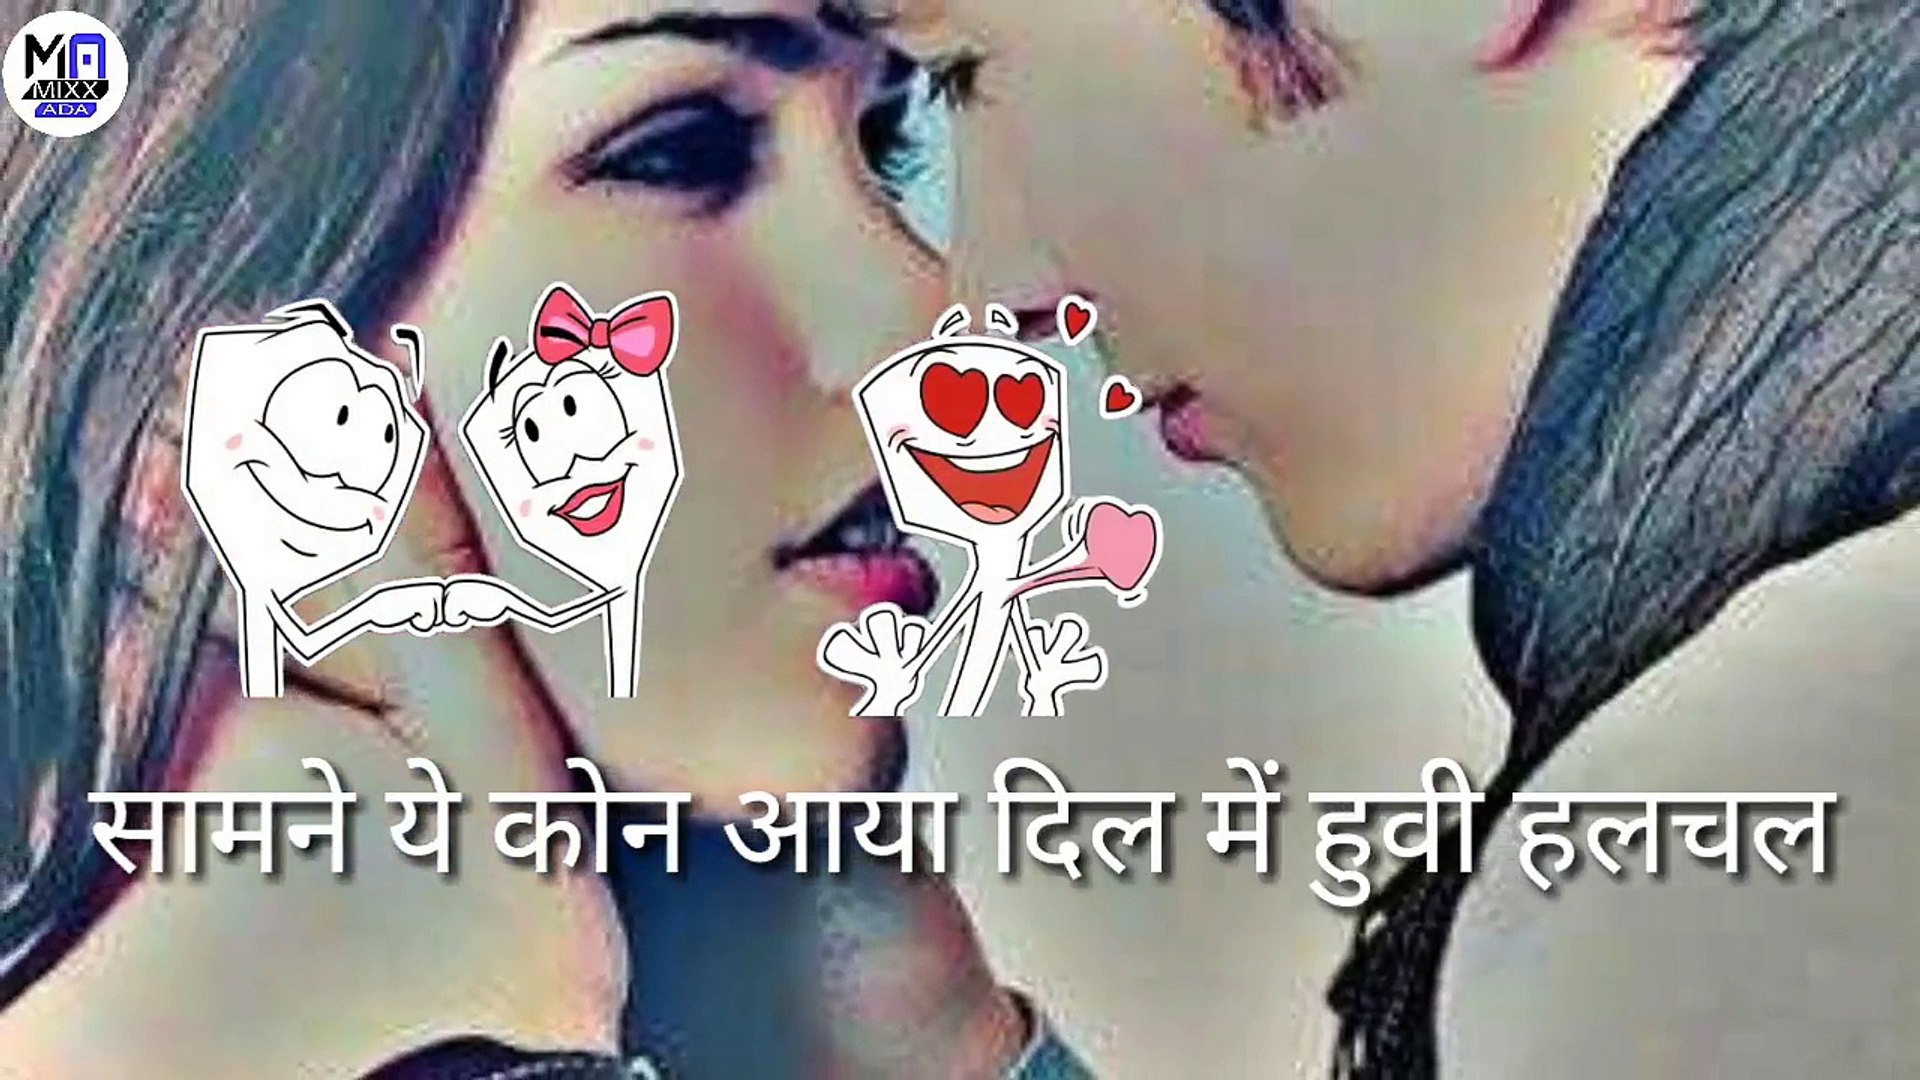 Letest Version Of Samne Yeh Kaun Aaya Whatsapp Status Videoby Mixx Ada Video Dailymotion The song is sung by kishore kumar and music is given by r.d.burman, music is available exclusively. dailymotion